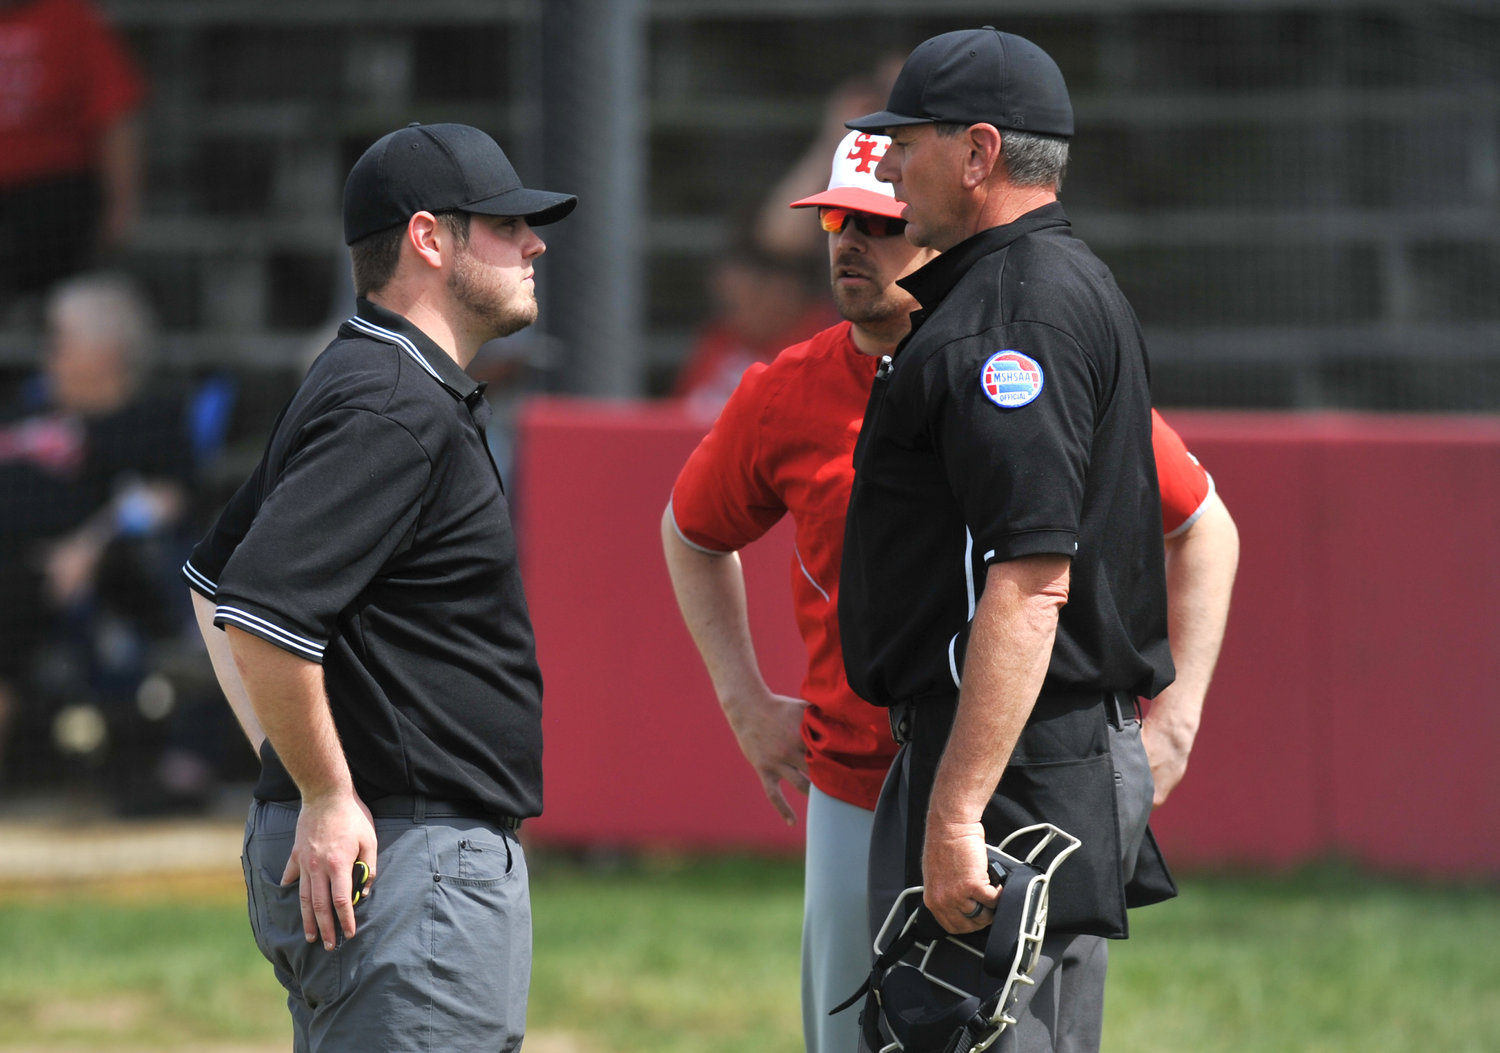 Connor Spunaugle, left, meets with Sacred Heart baseball head coach Jaric Reid and home plate umpire Brian Rice during a Kaysinger Conference Baseball Tournament game April 26 in Lincoln.